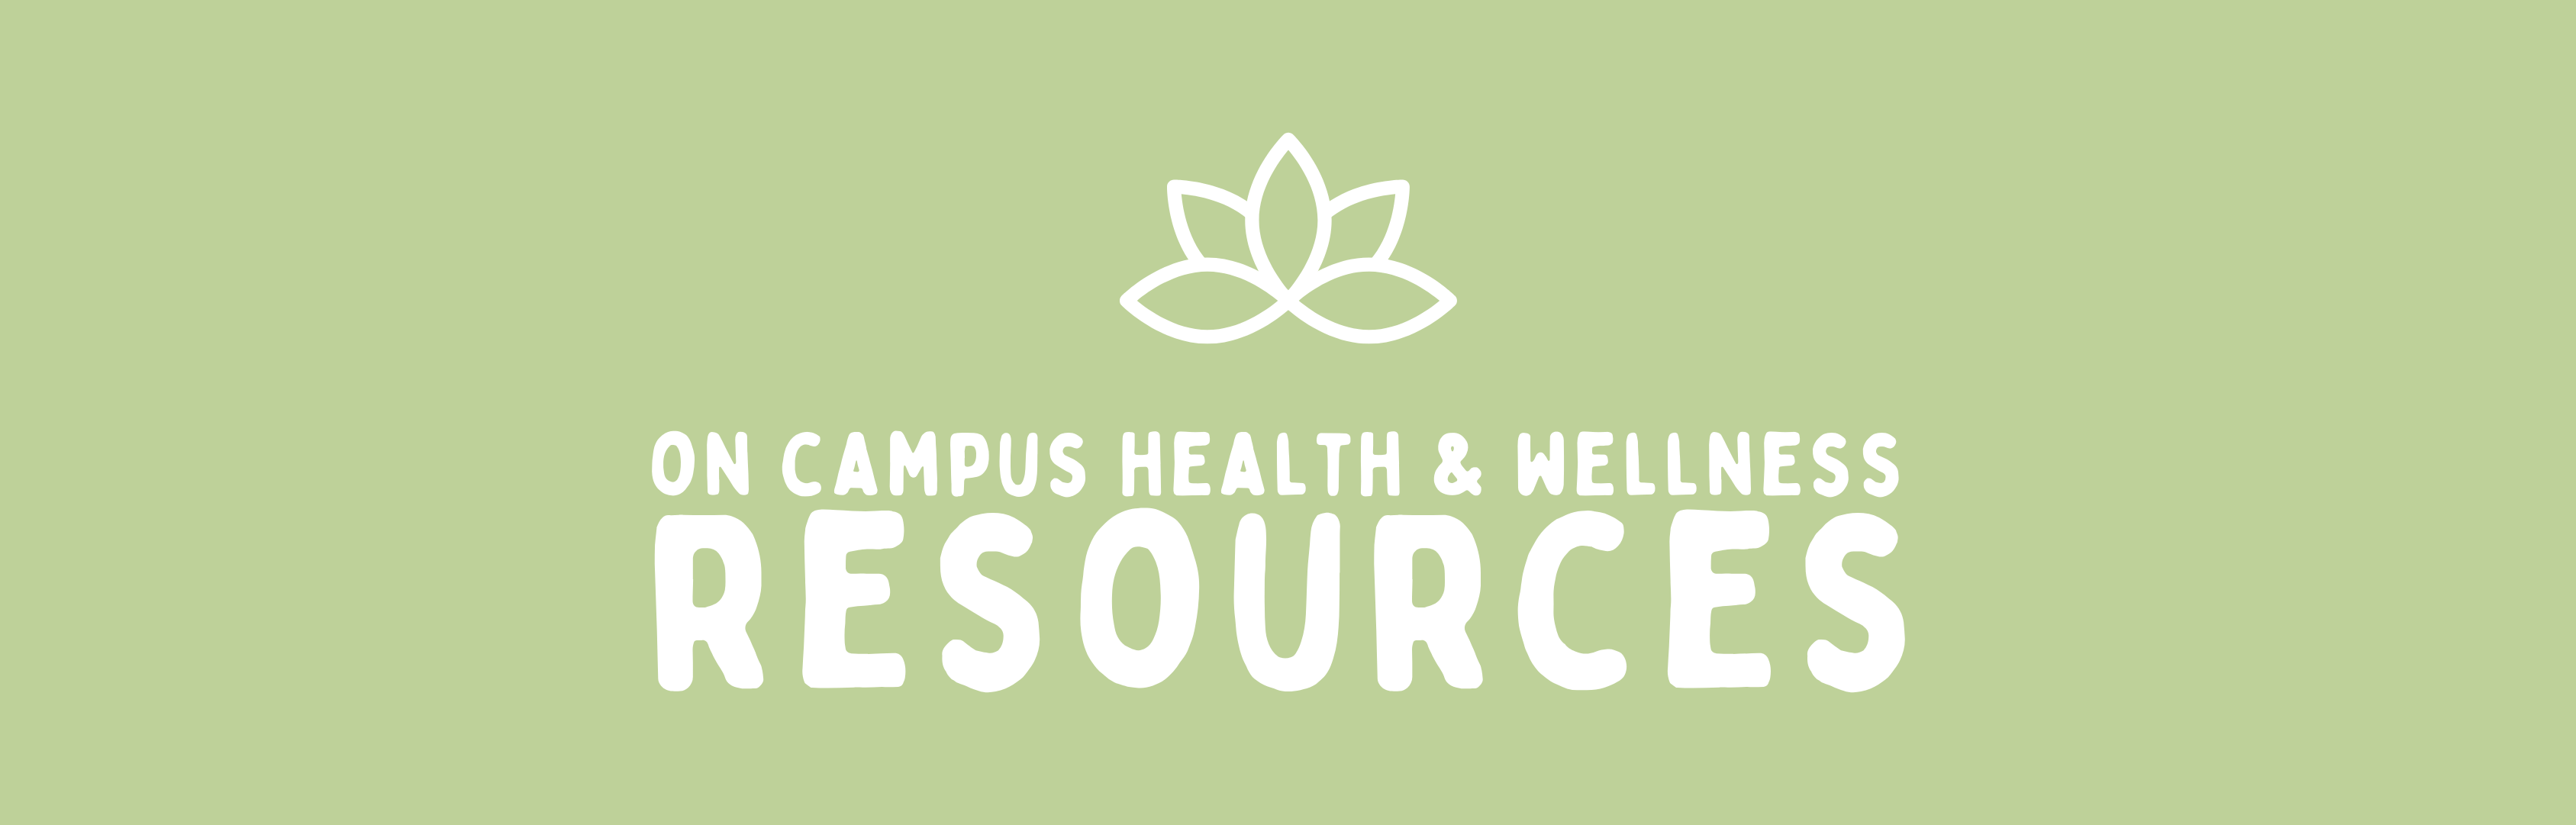 Graphic of On-Campus Health & Wellness Resources